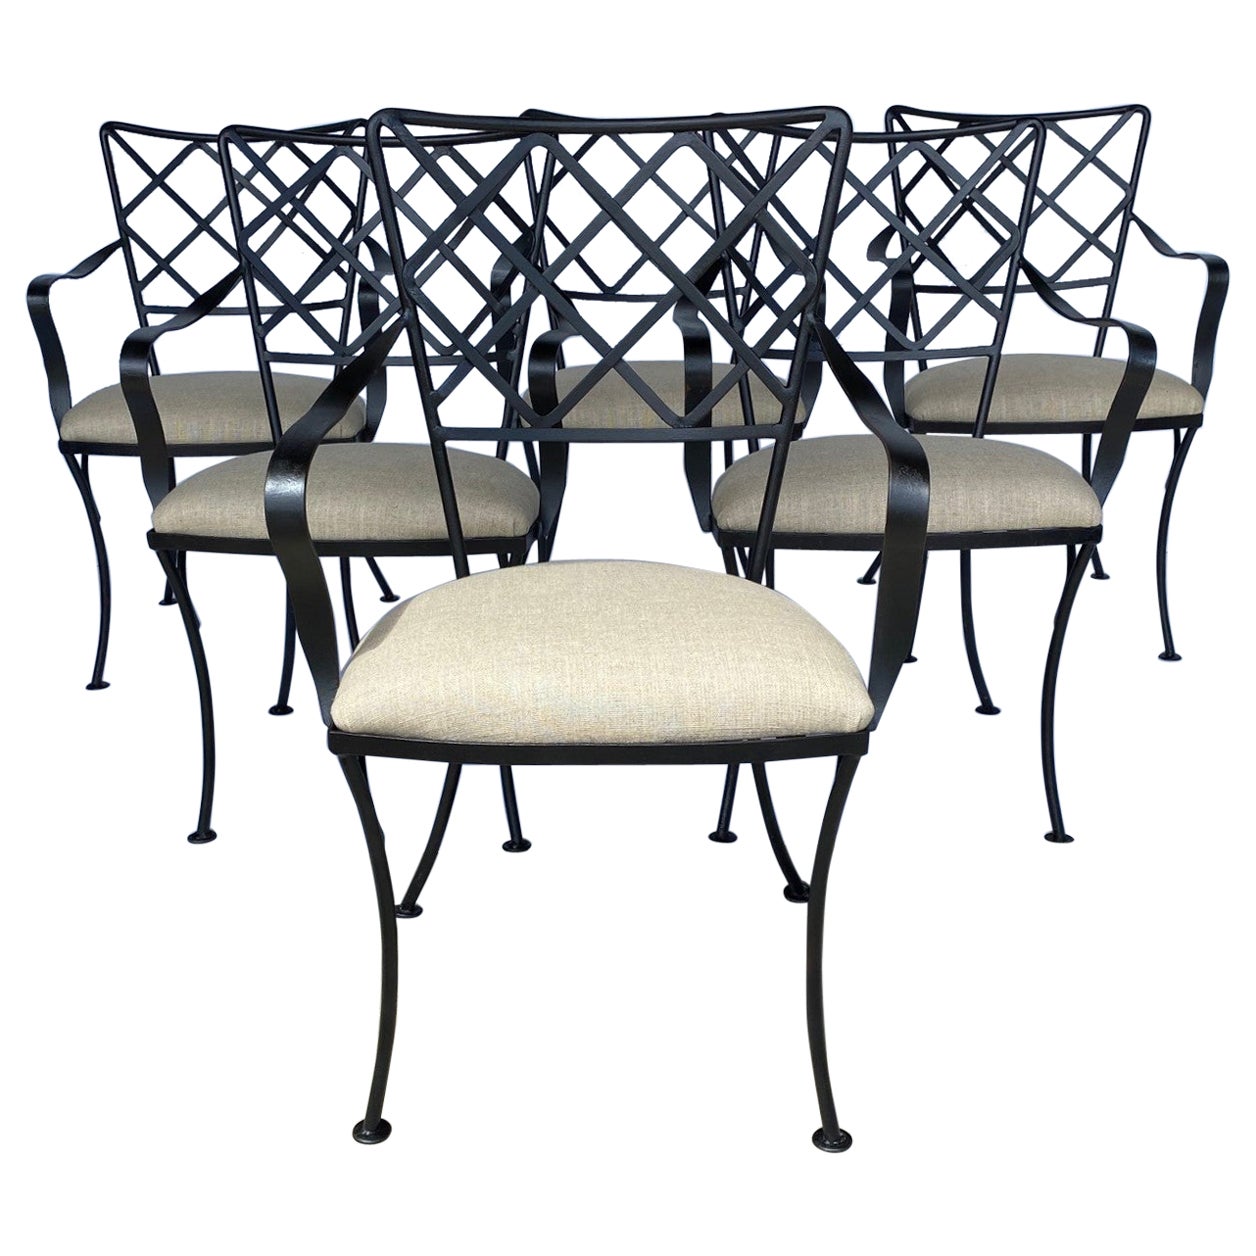 Iron Patio Dining Chairs Set of 6